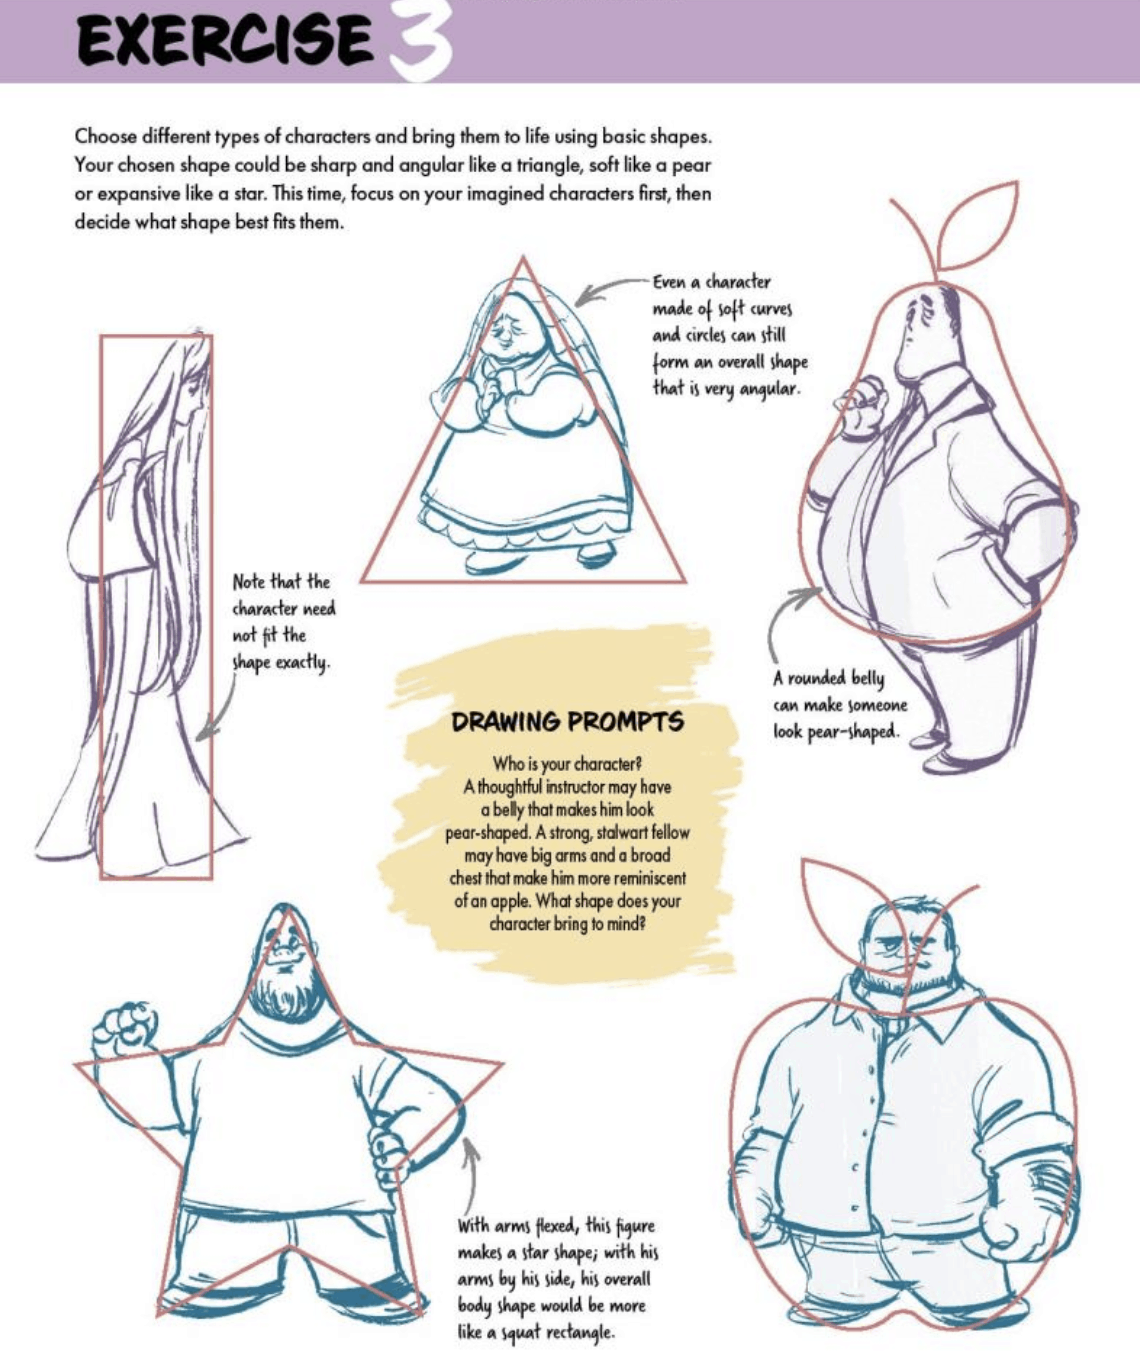 She teaches you to draw characters from shapes. 